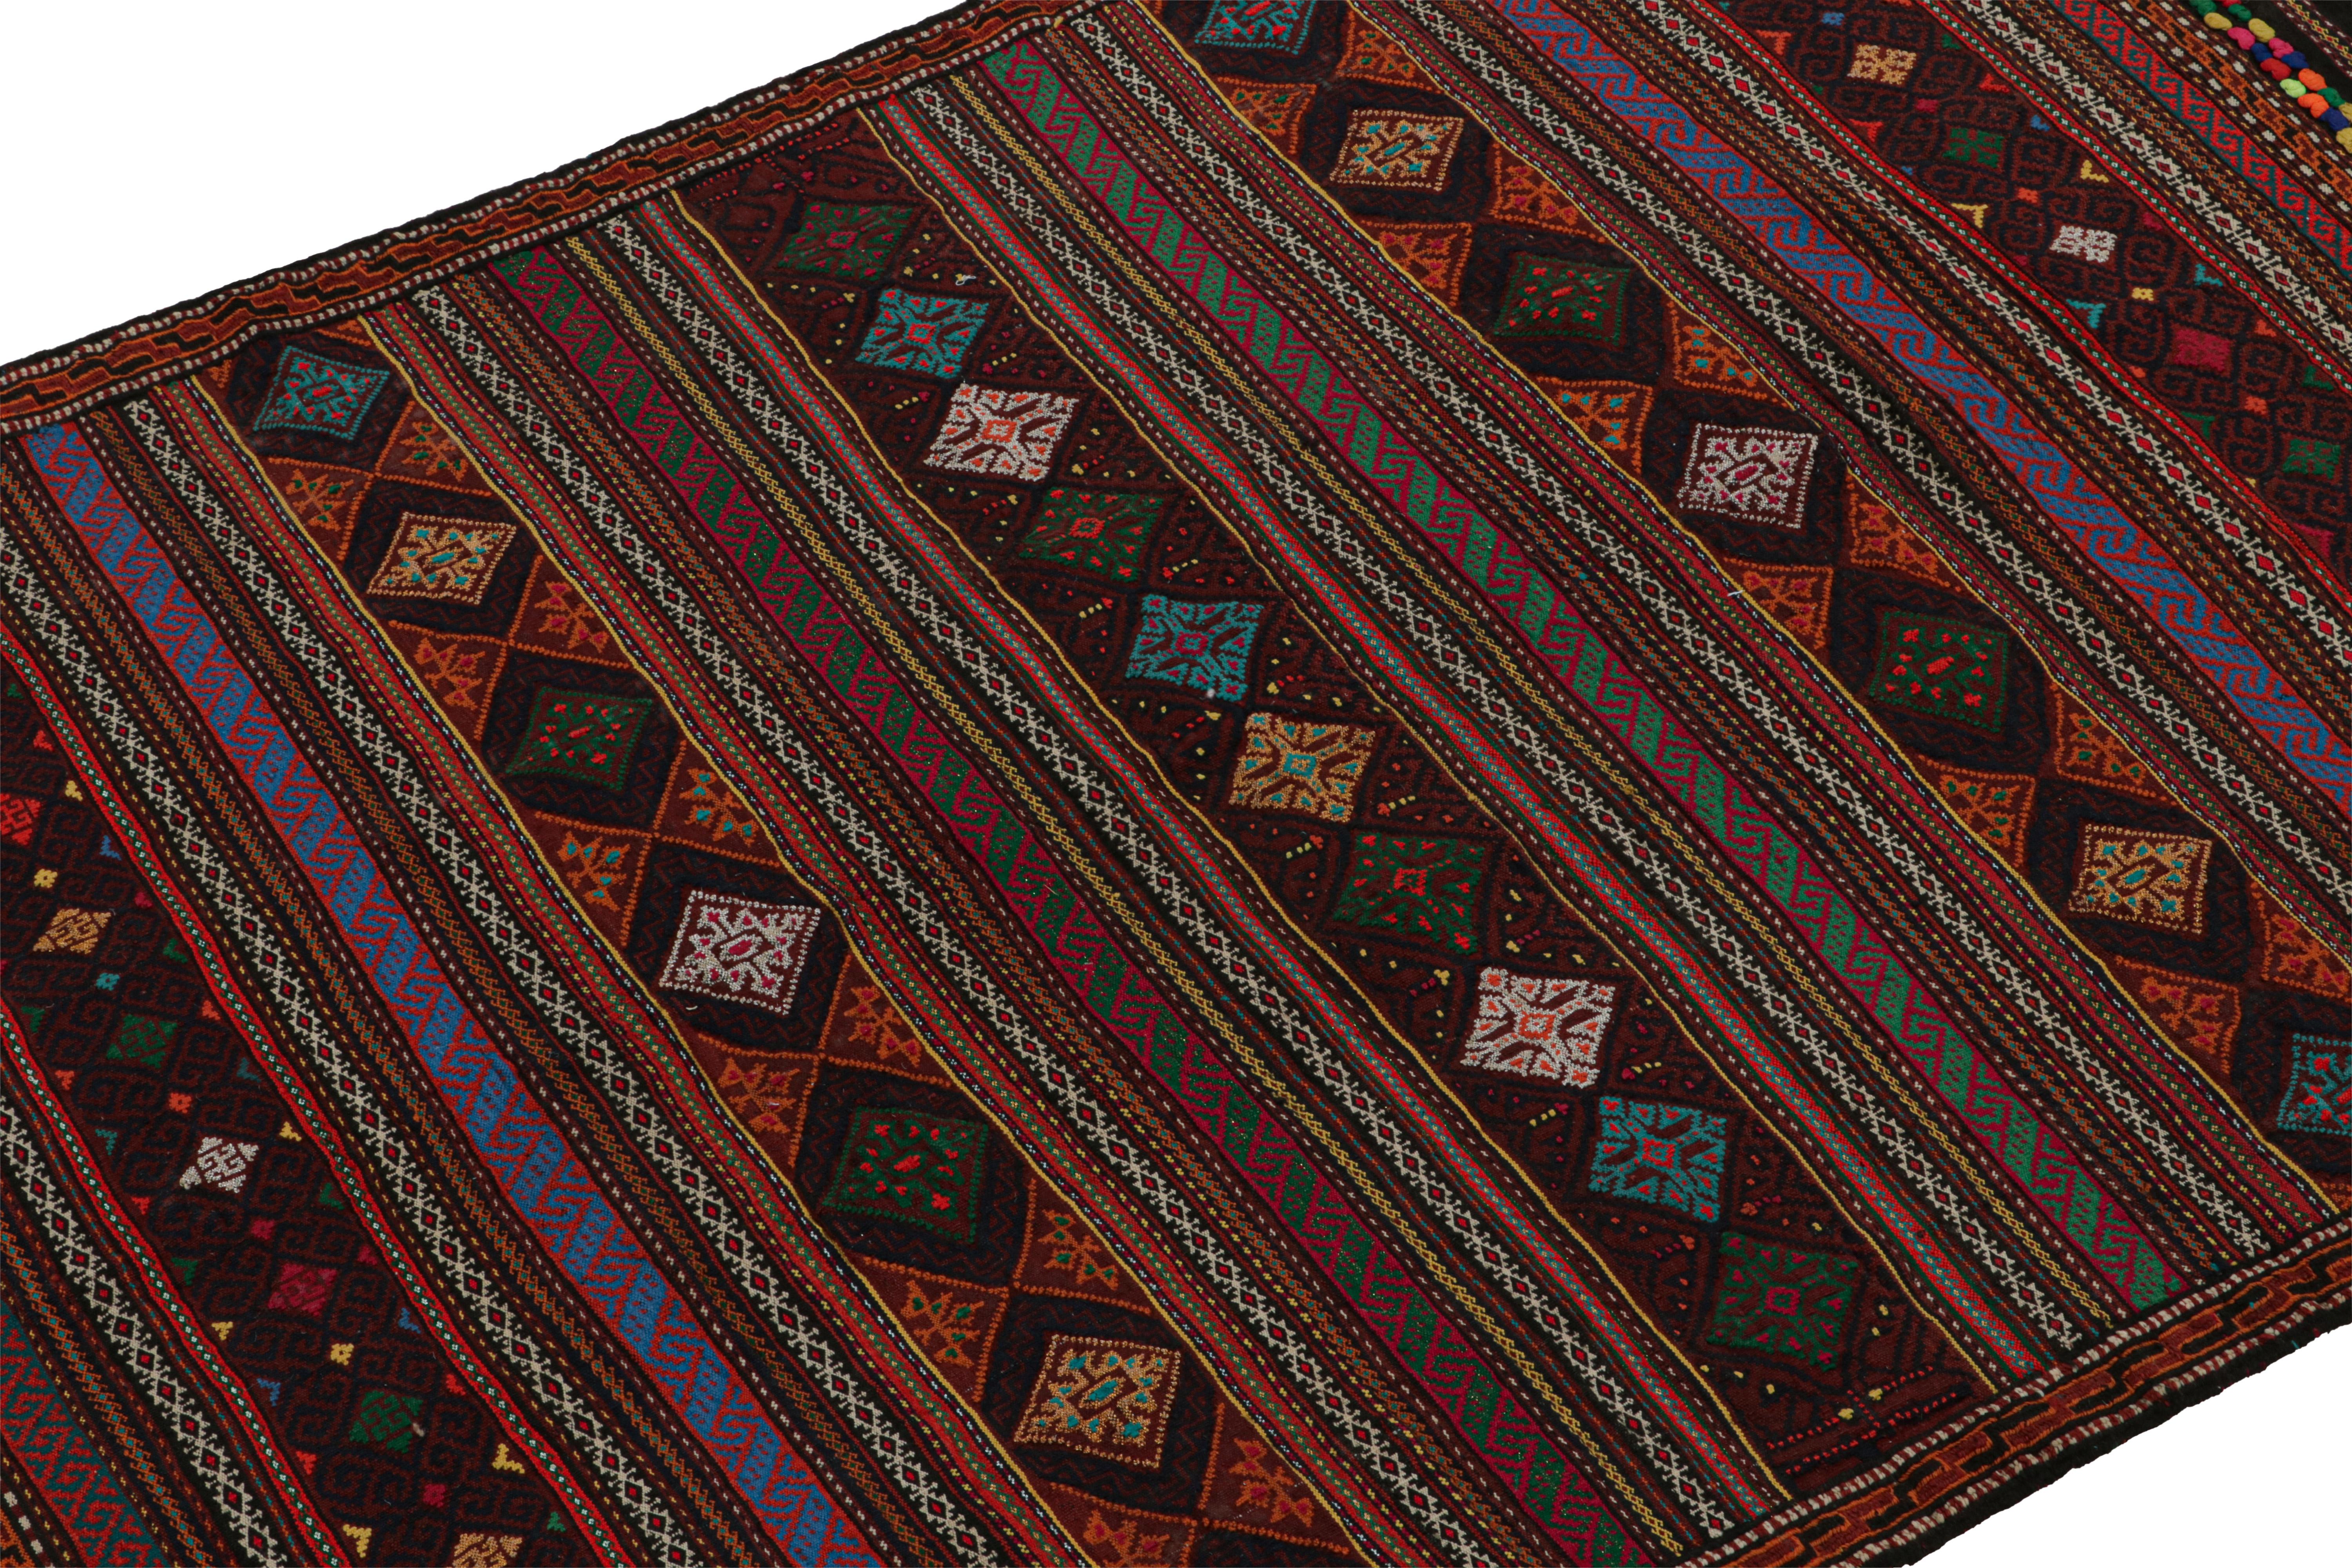 Hand-Woven Vintage Baluch Tribal Kilim with Colorful Geometric Patterns, from Rug & Kilim For Sale